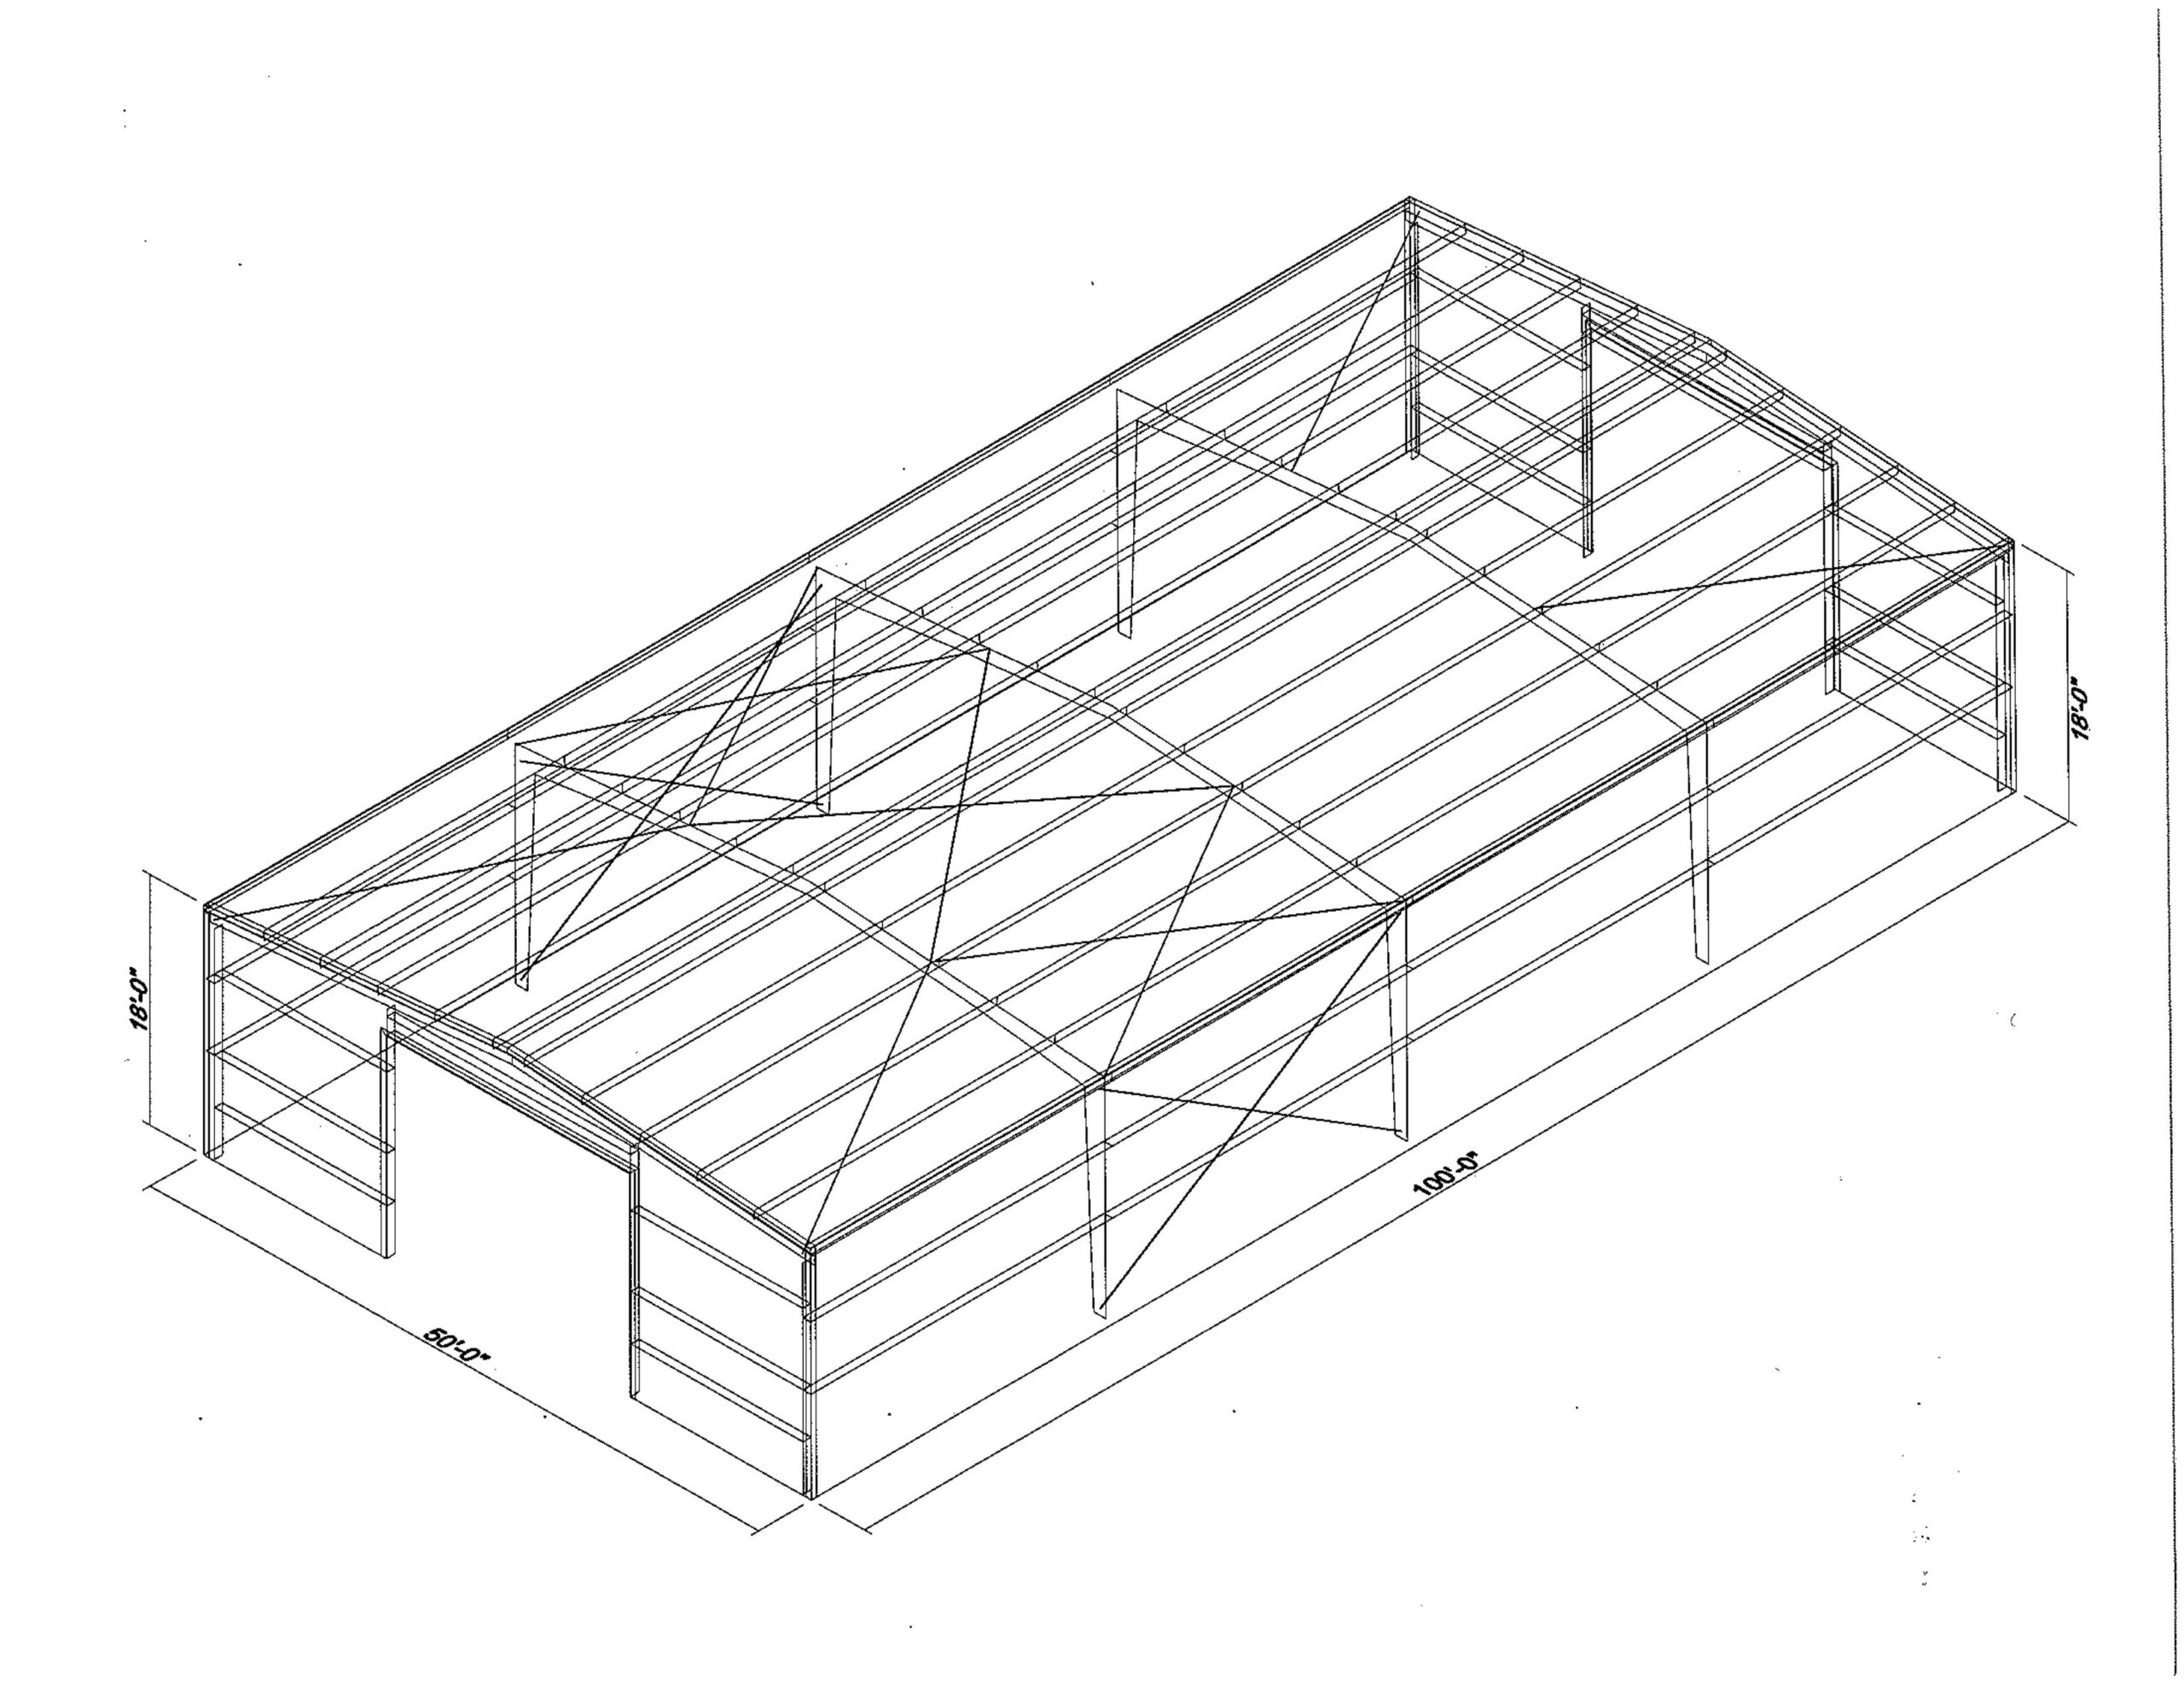 Diagram of building structure, current special